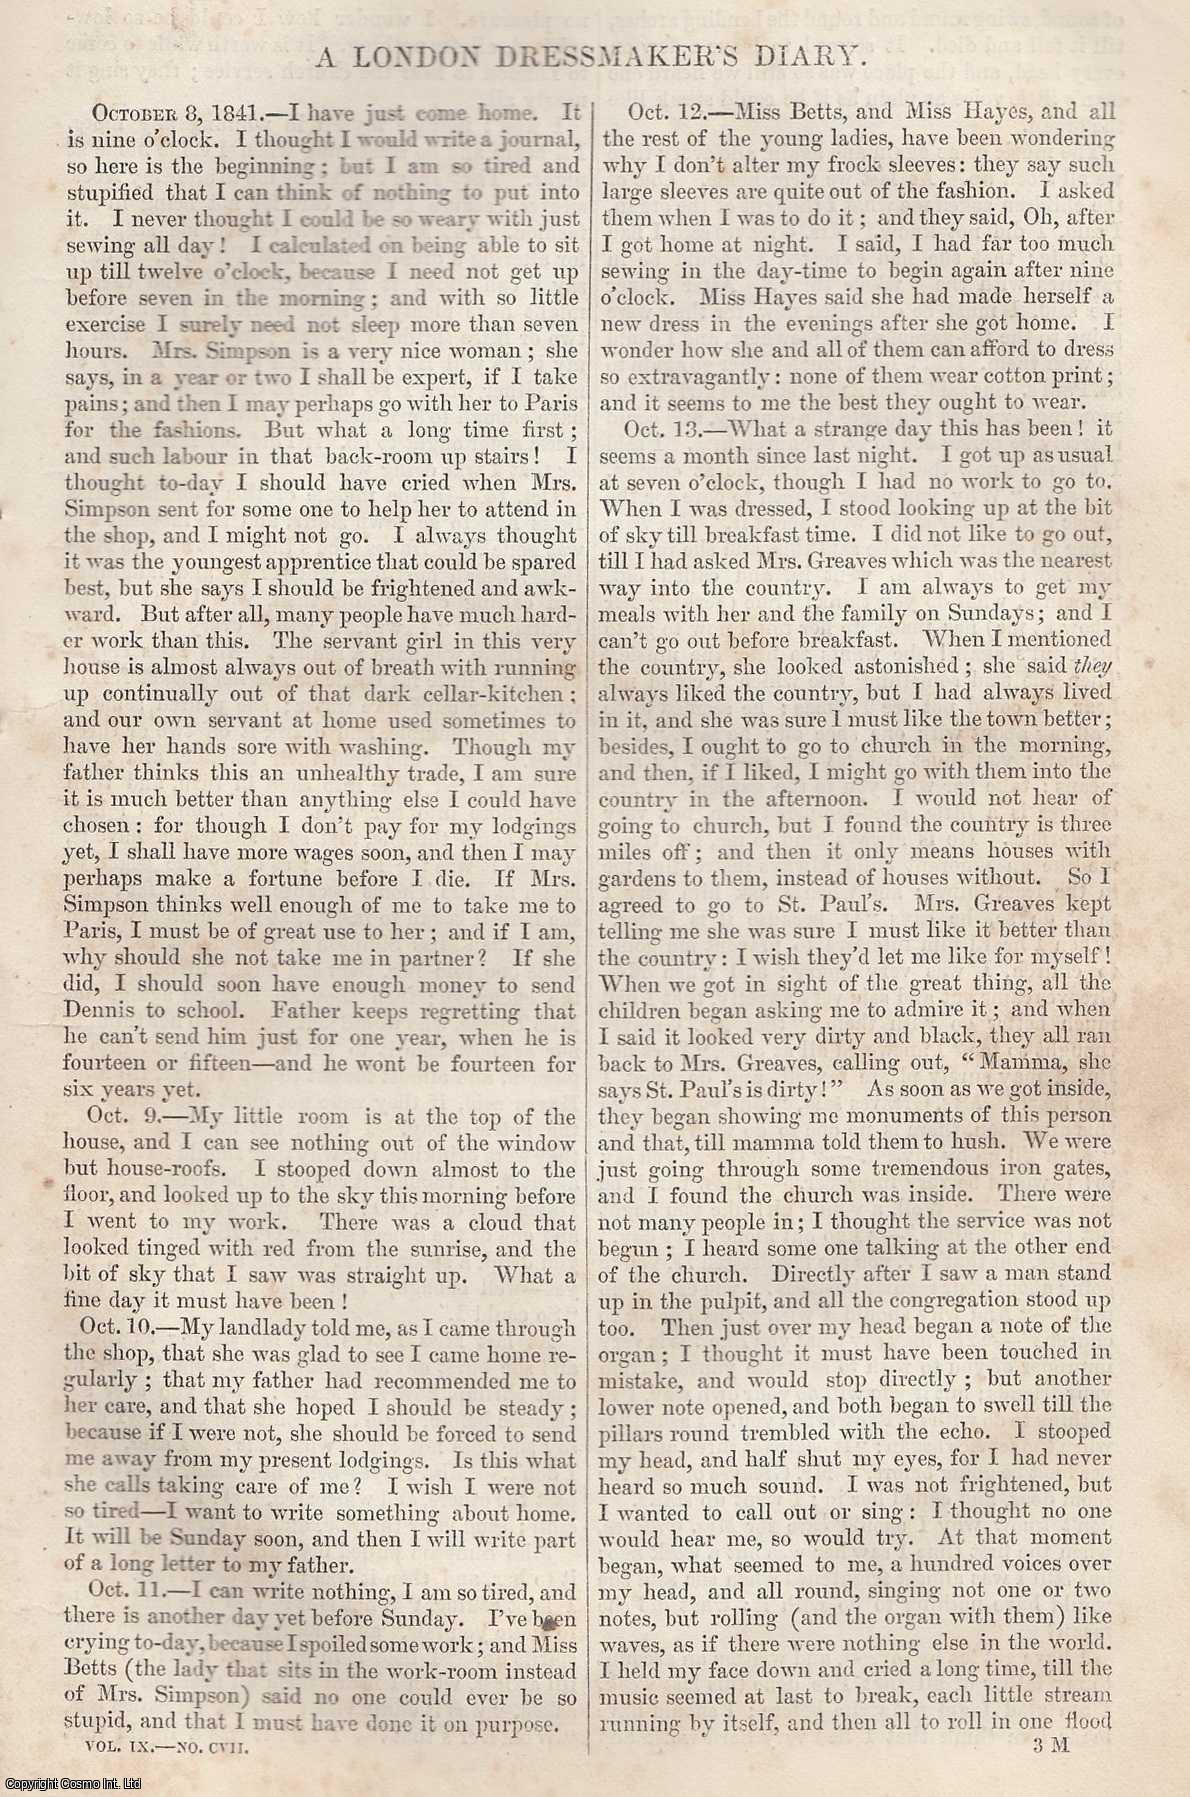 No Author Stated - A London Dressmaker's Diary. An original article from Tait's Edinburgh Magazine, 1842.